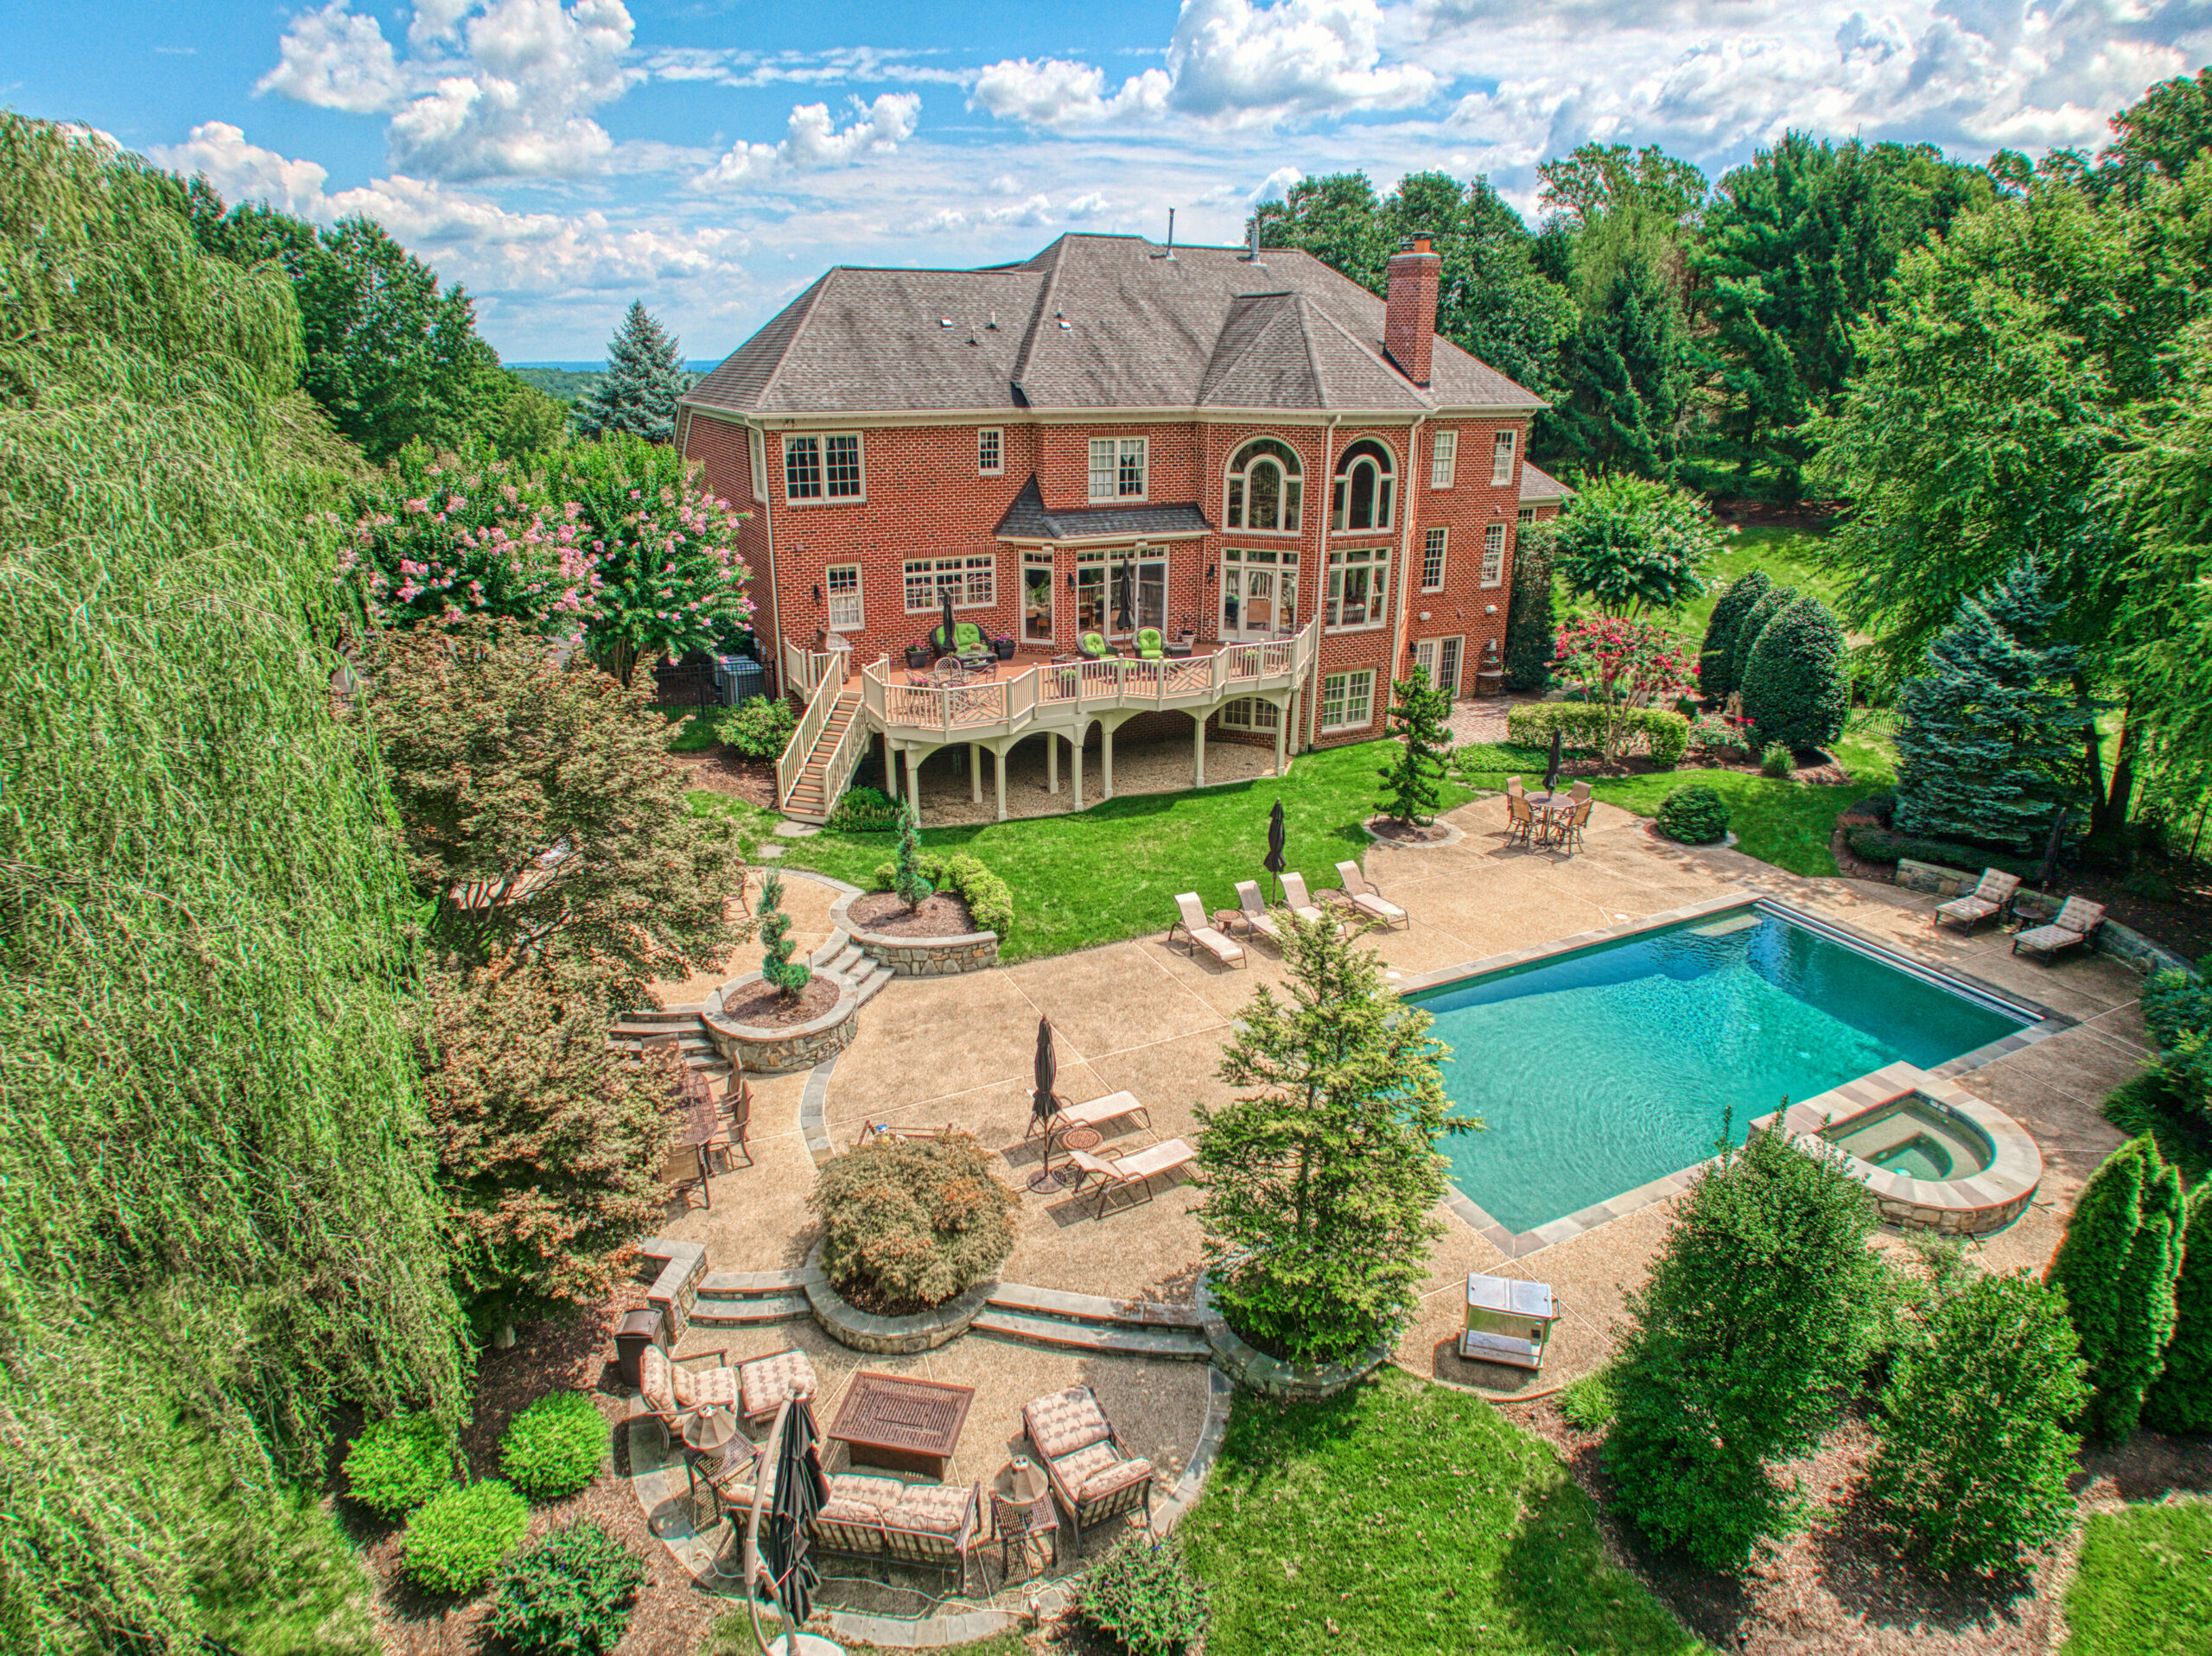 Professional exterior photo of 17087 Bold Venture Drive, Leesburg - drone photo showing the rear of the home with large deck, several stone patios and pool and hot tub